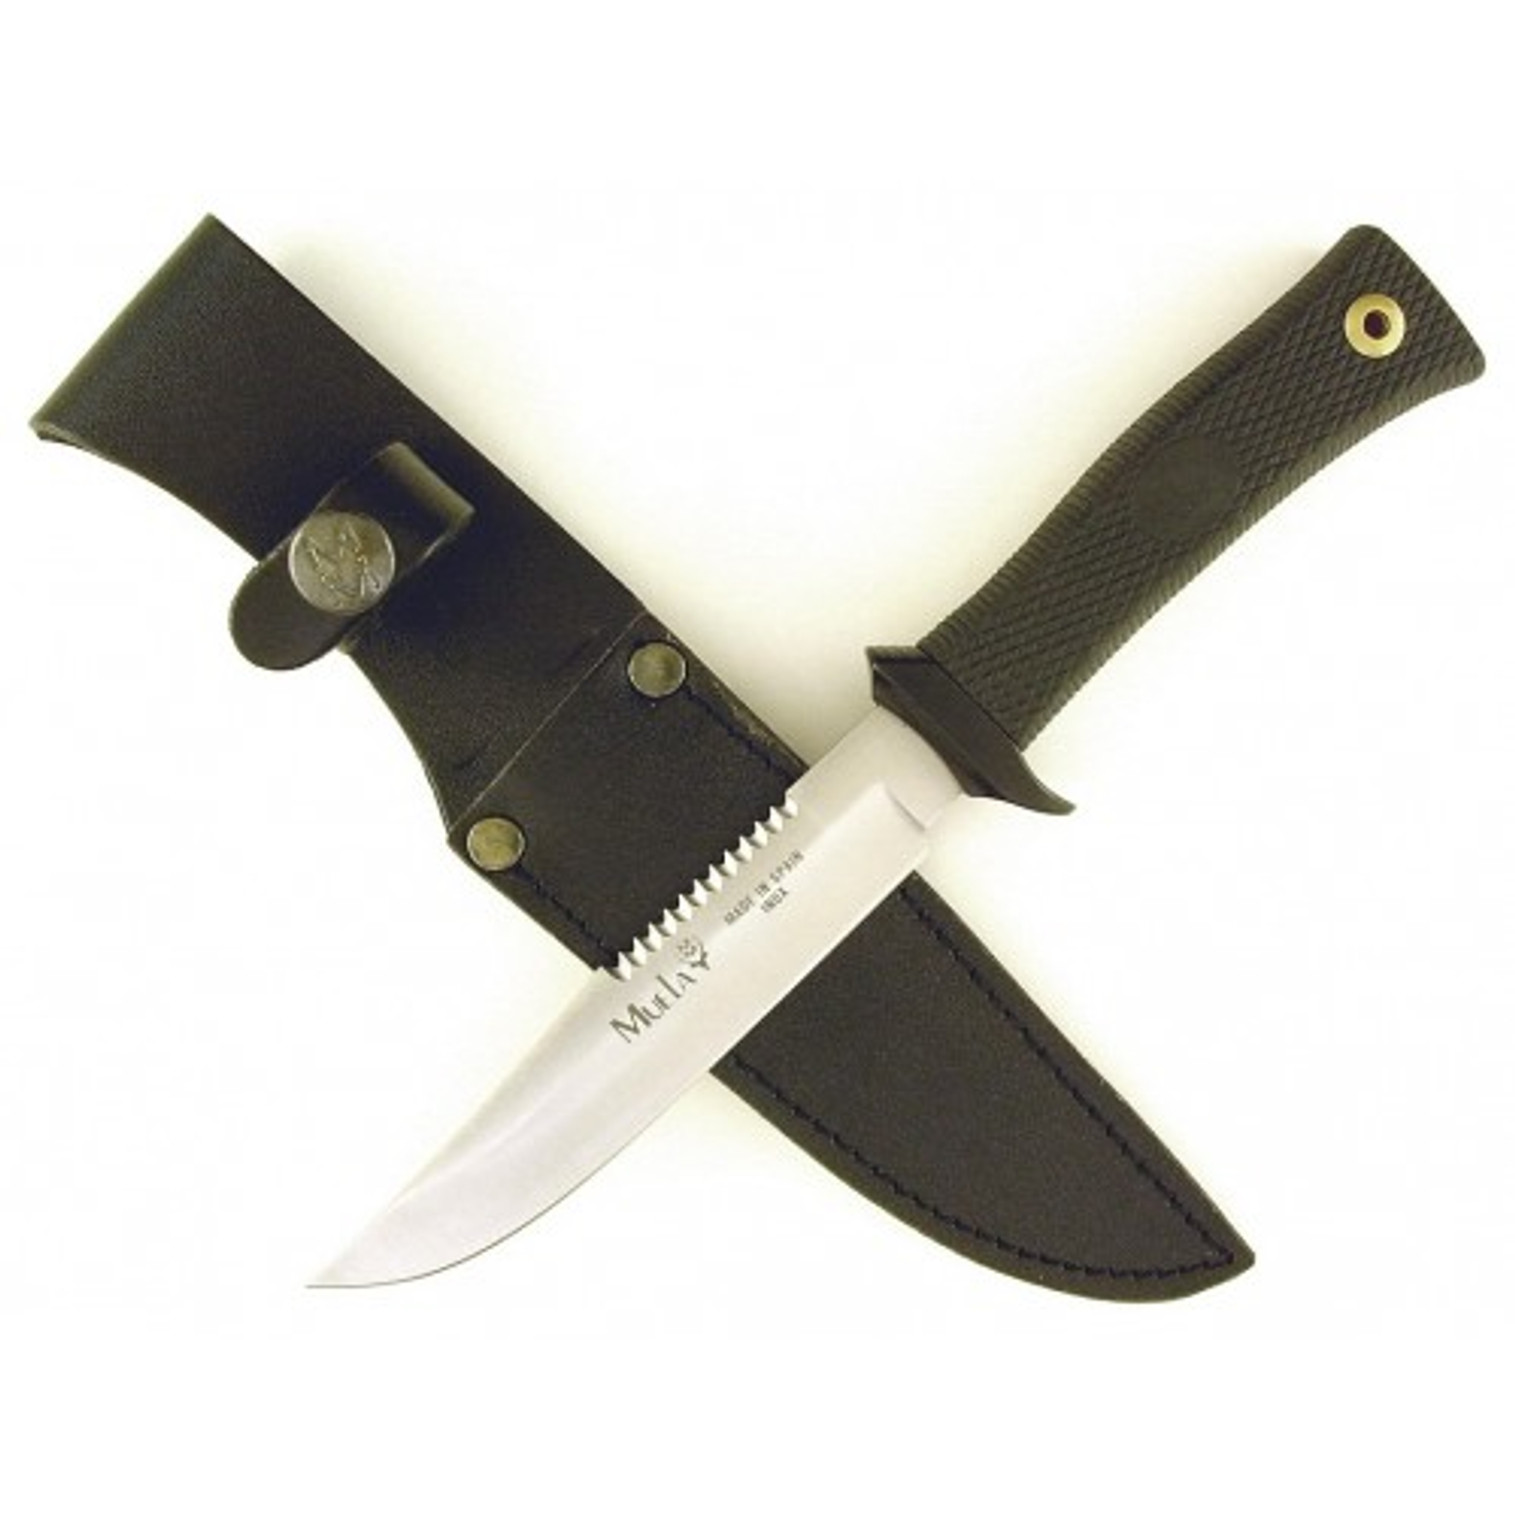 MUELA 25-12, 420H, 5-5/8" Fixed Blade Hunting Knife, Kraton Rubber Handle